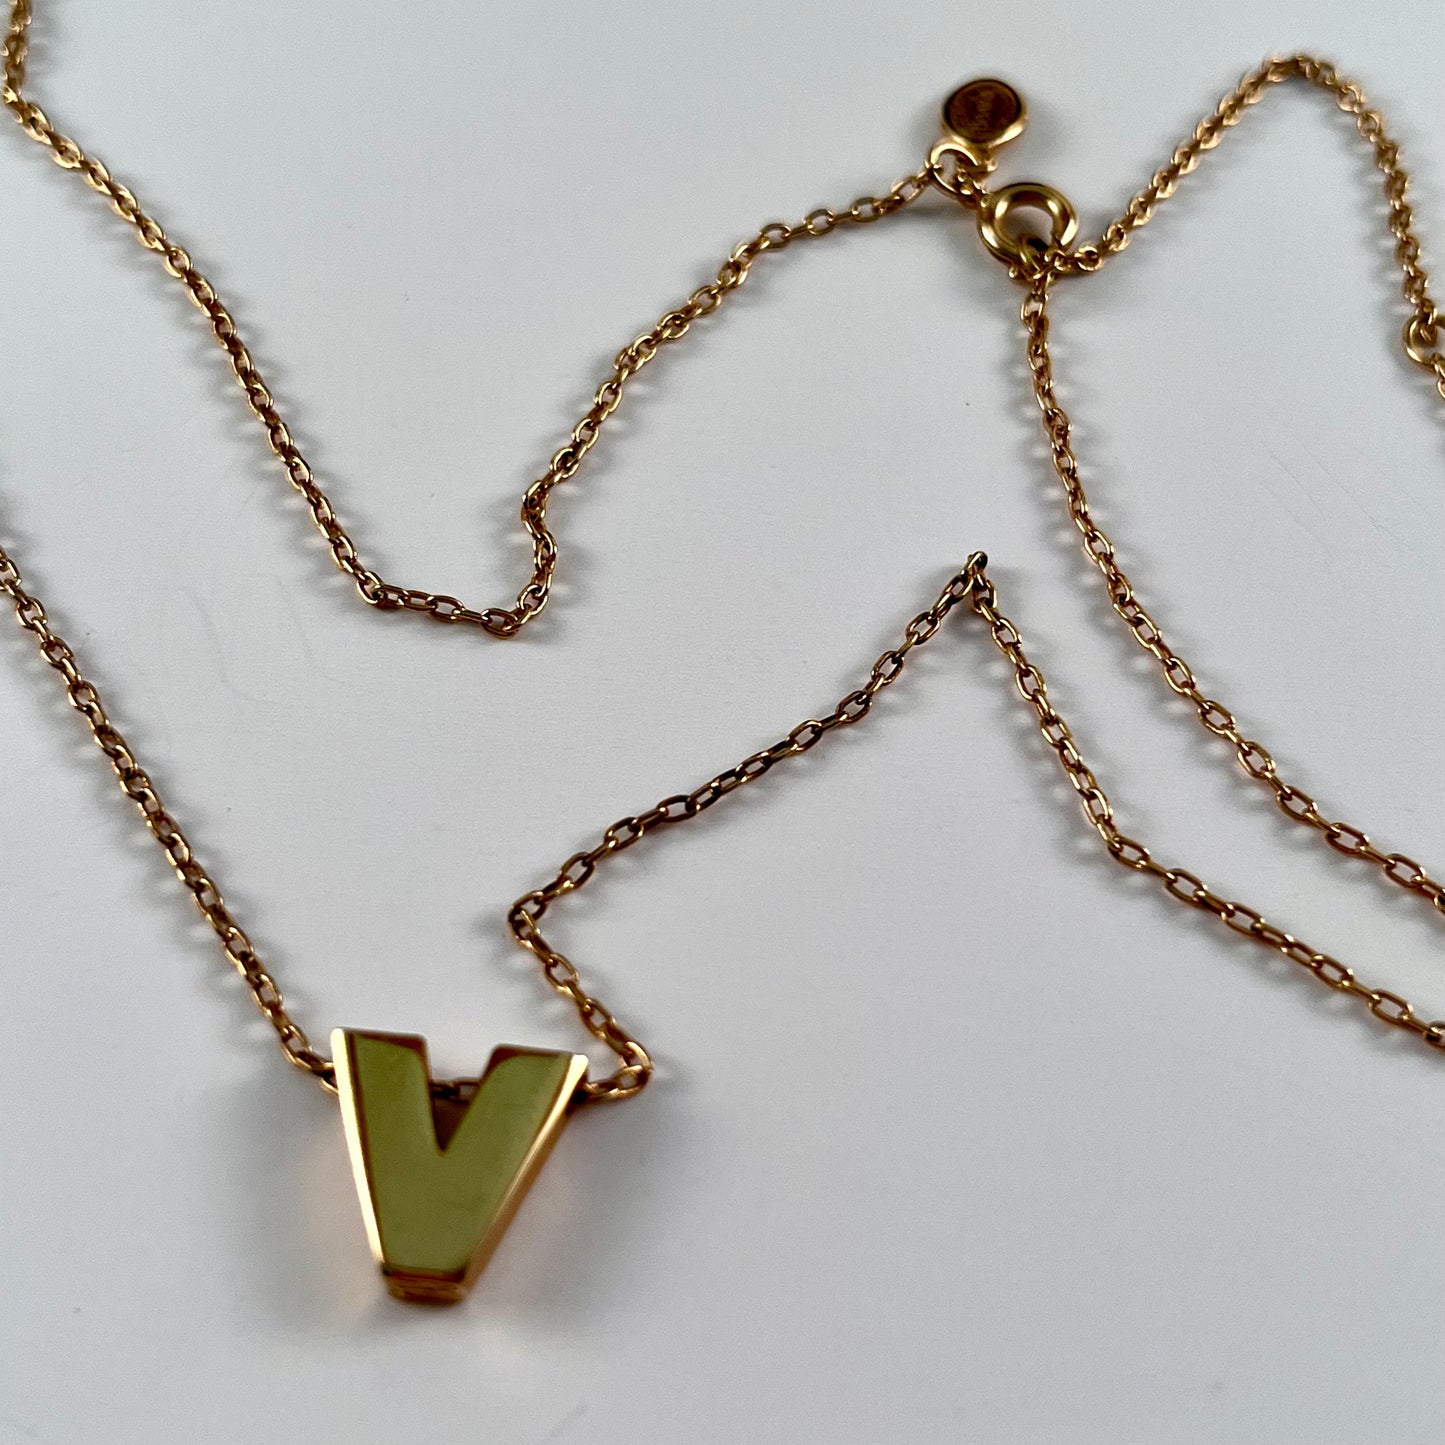 Avon 1978 Initial Attraction Necklace